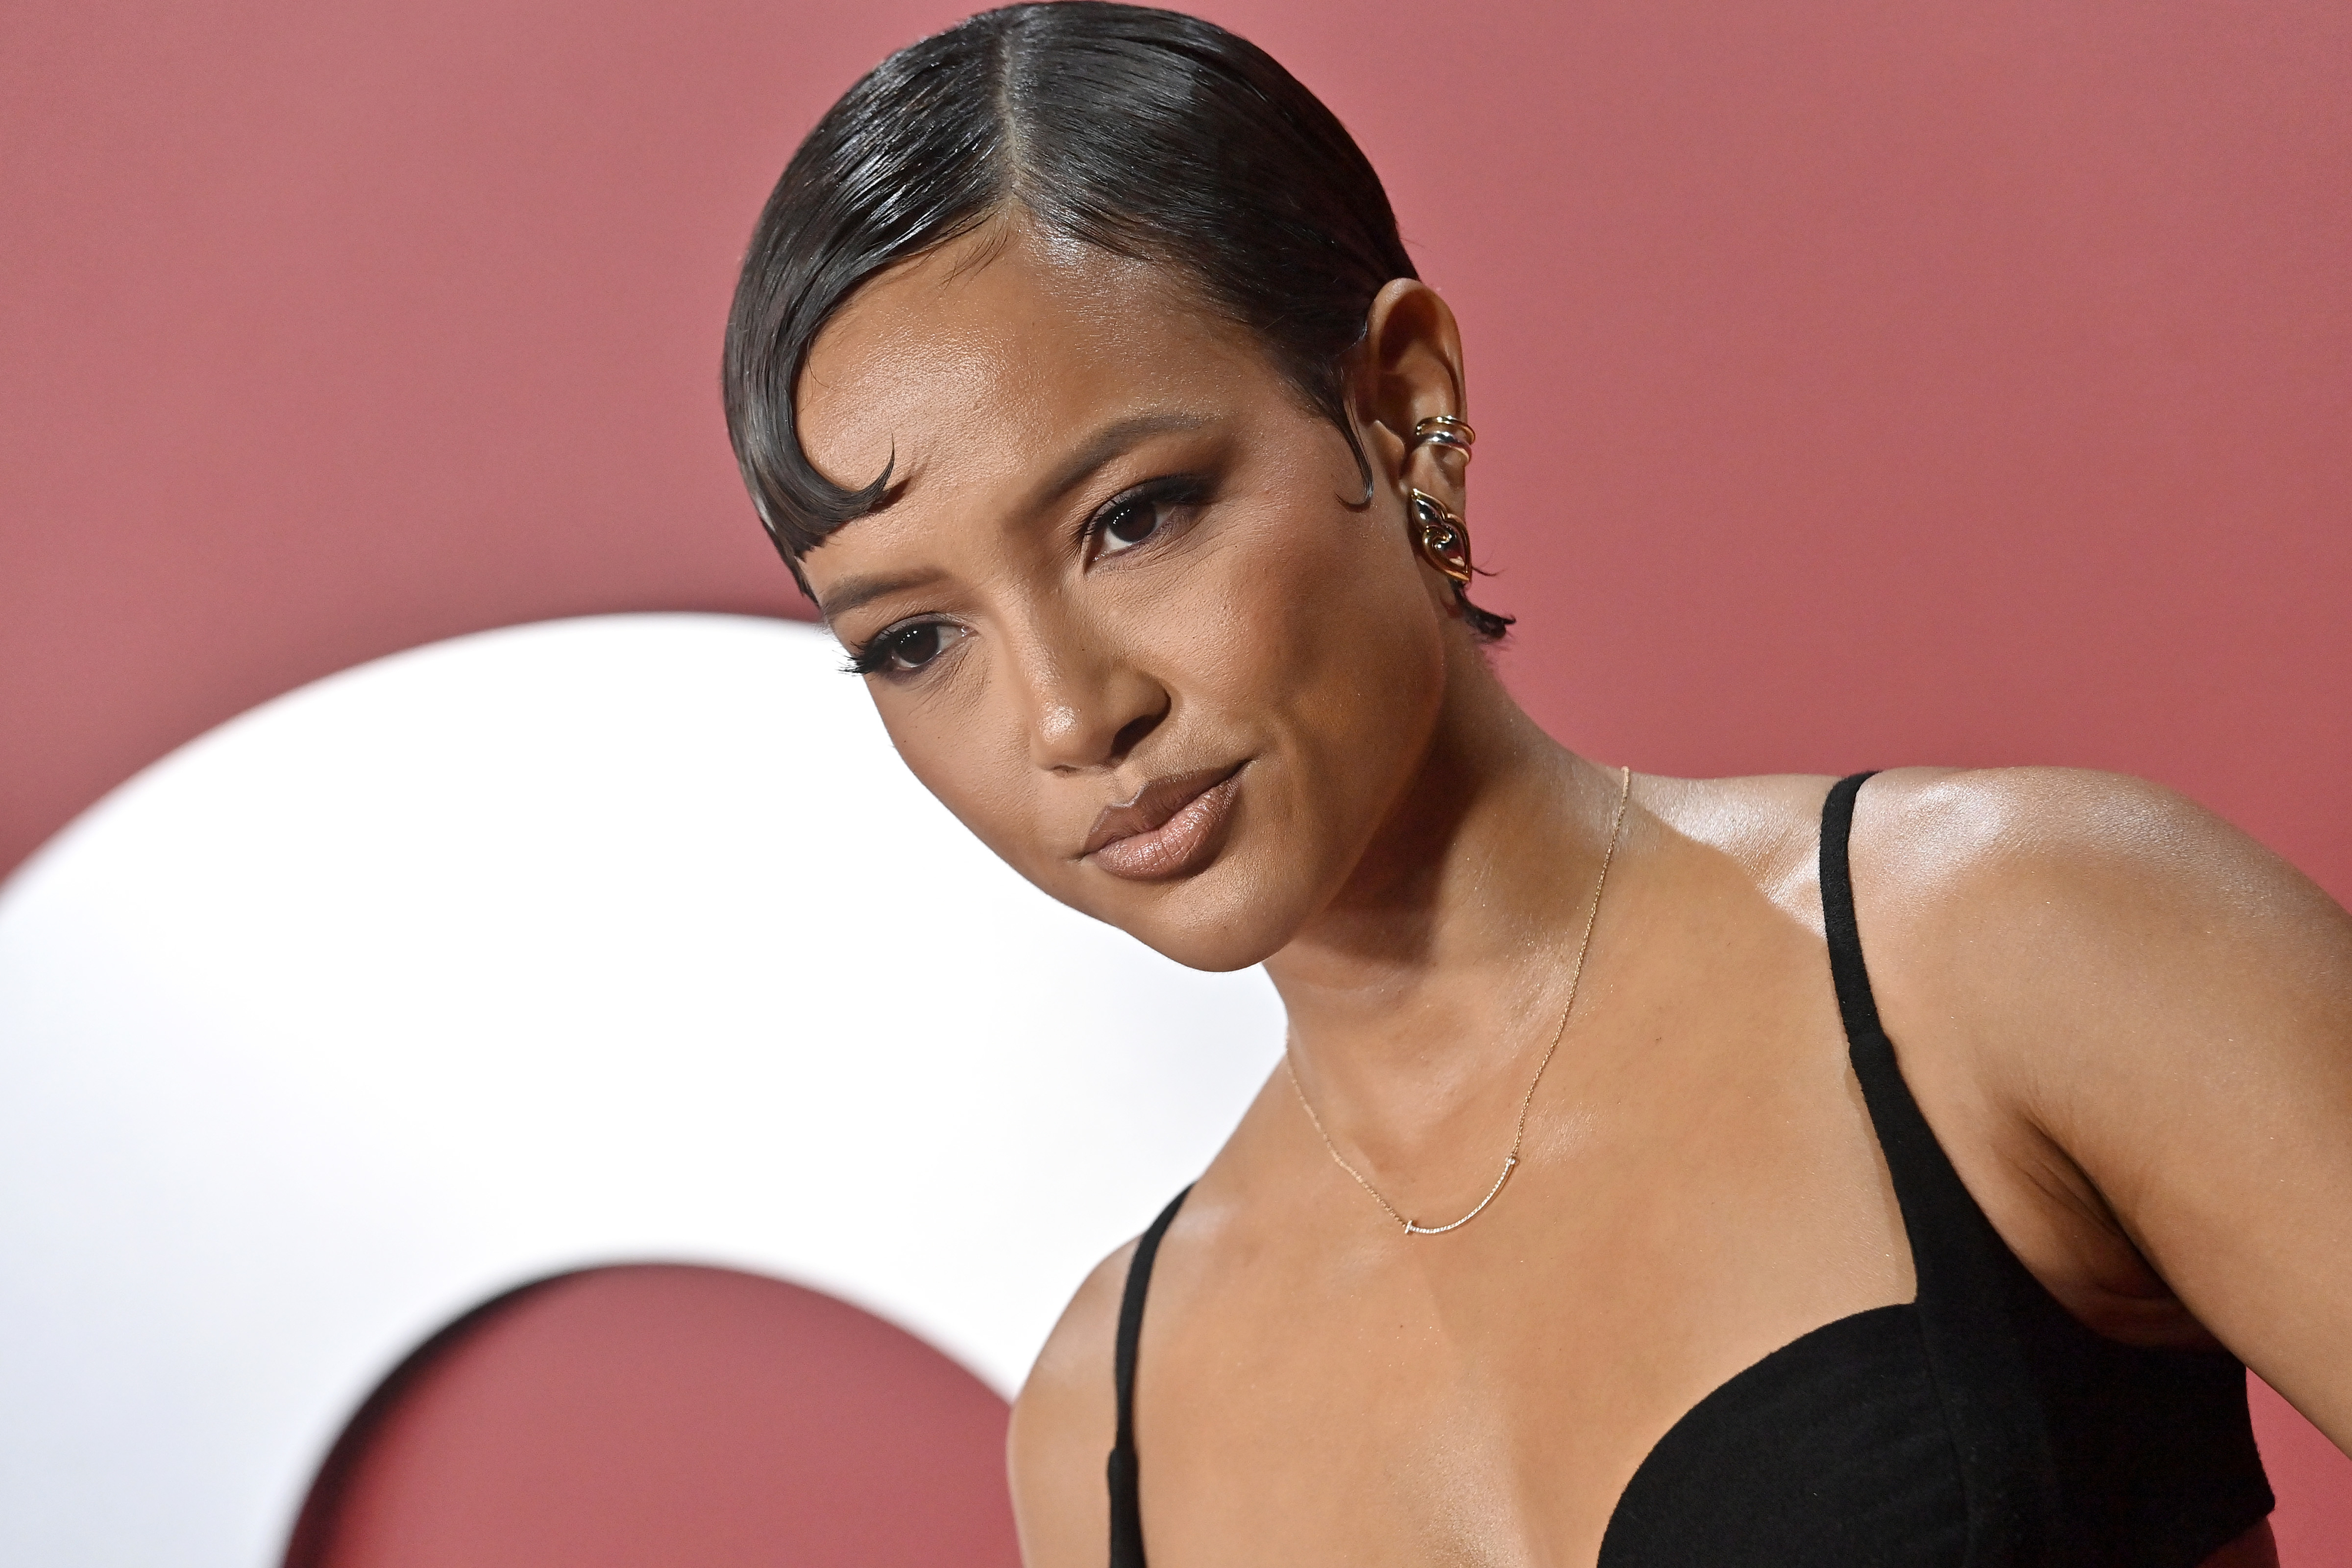 Karrueche Tran posing in a black sleeveless dress with her hair styled in a kicked back short haircut